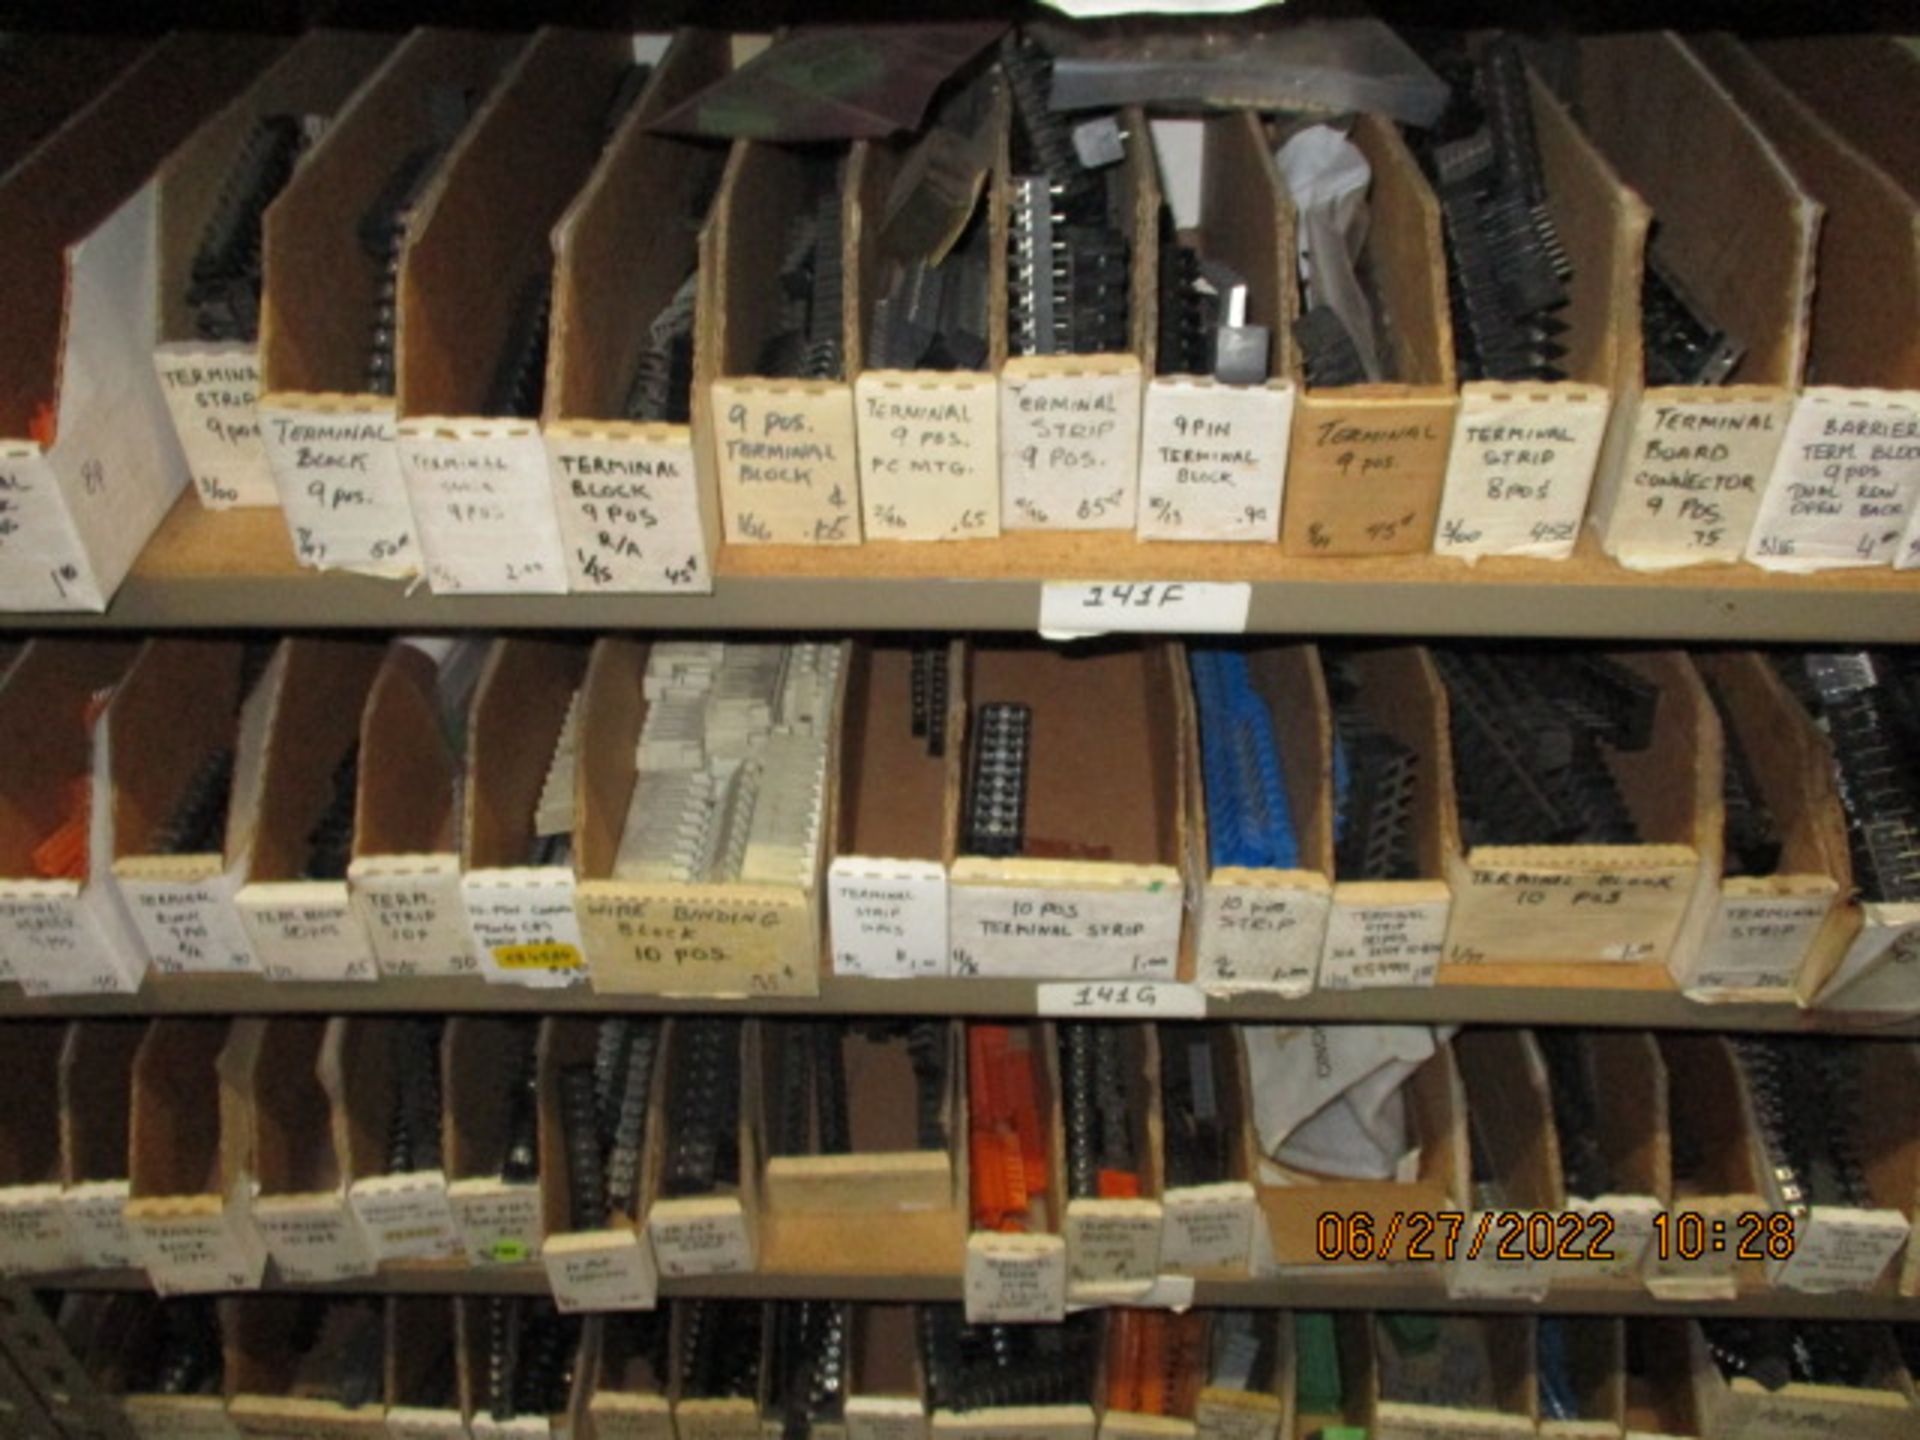 CONTENTS OF SHELVING UNIT CONSISTING OF INSULATORS, COVERS, 2-10 PIN CONNECTORS - Image 4 of 5